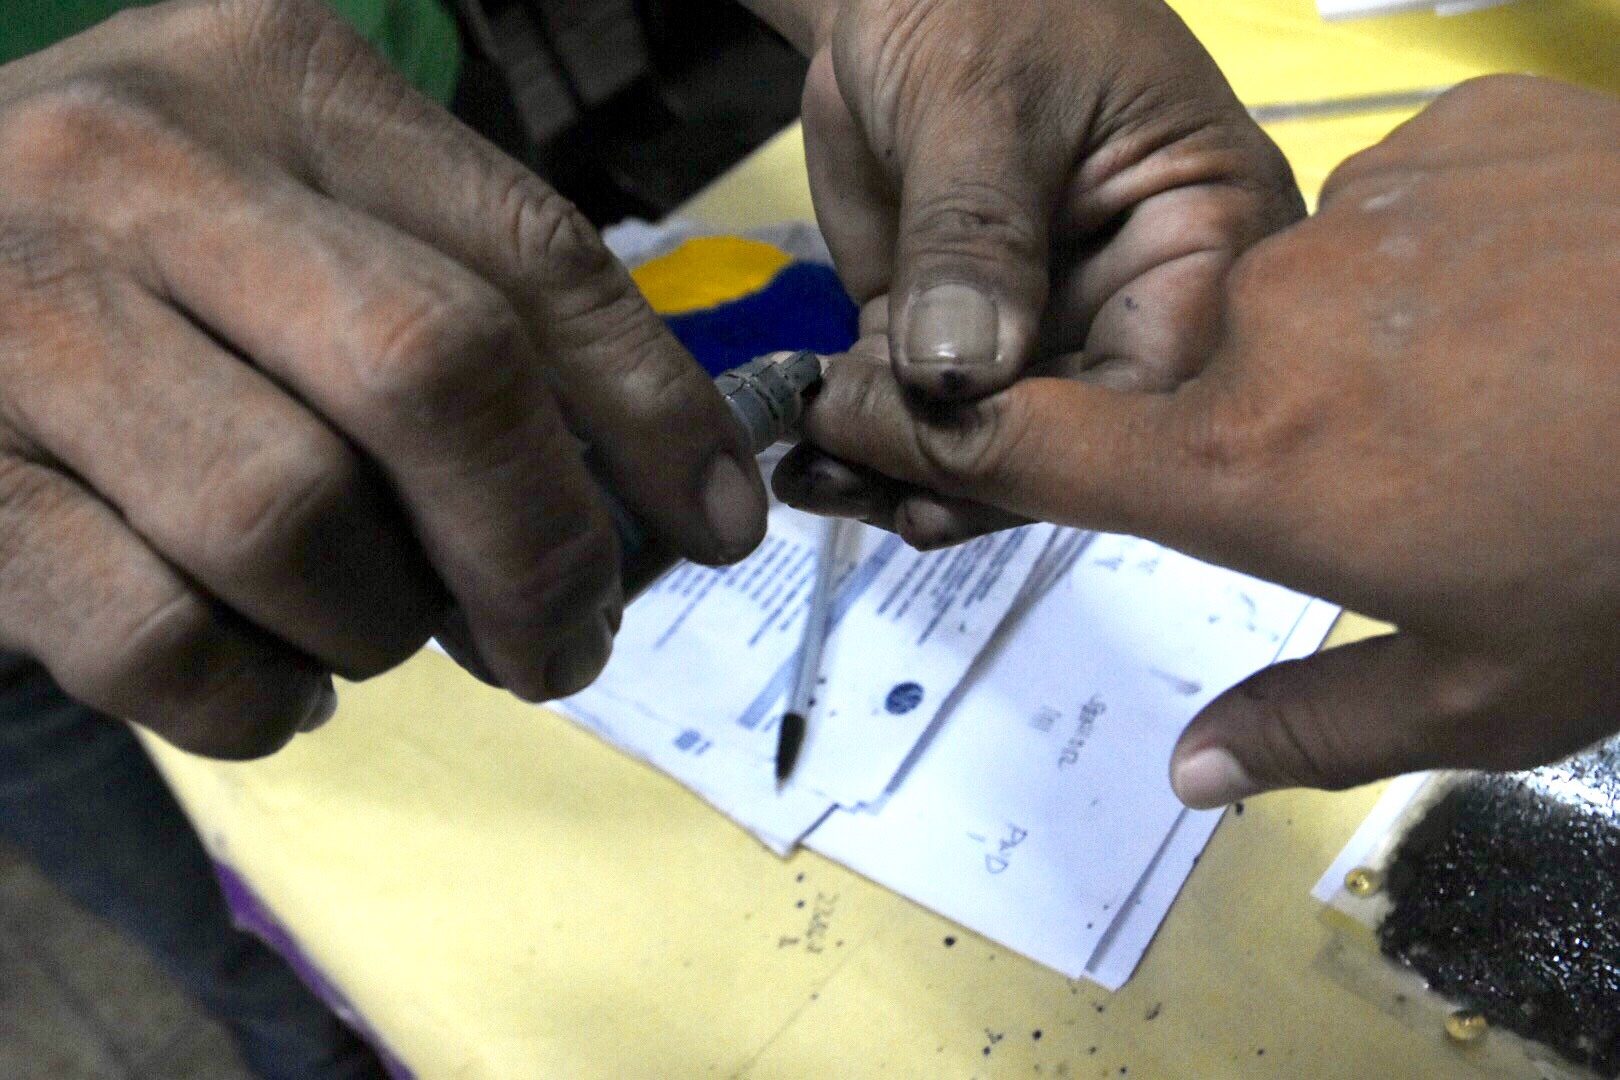 INDELIBLE INK. An election officer applies an indelible ink to a voter after casting his vote at Bagong Silang Elementary School, Caloocan City. Photo by Angie de Silva/Rappler 